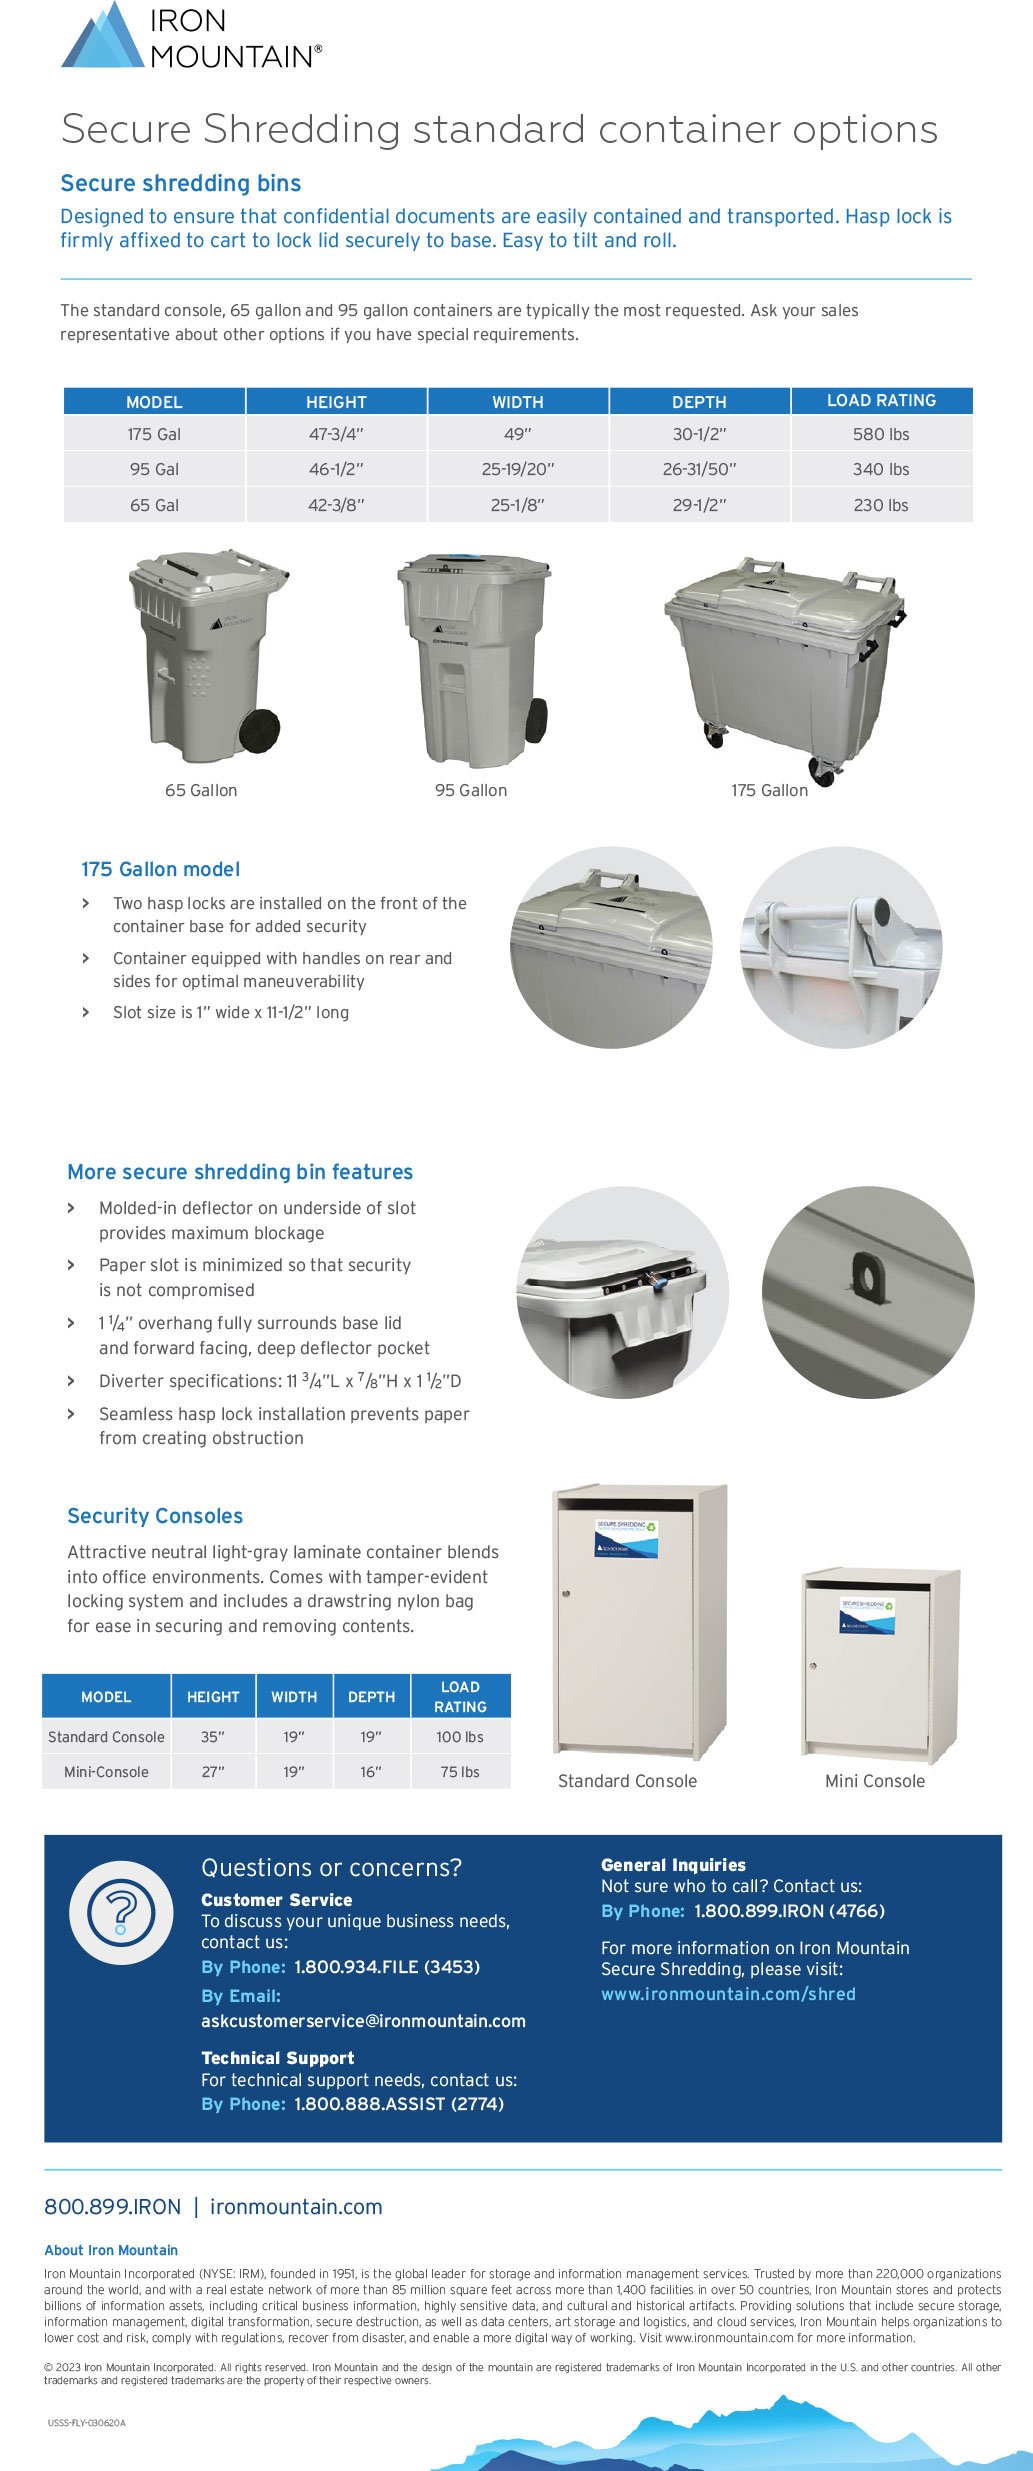 Secure shredding standard container options